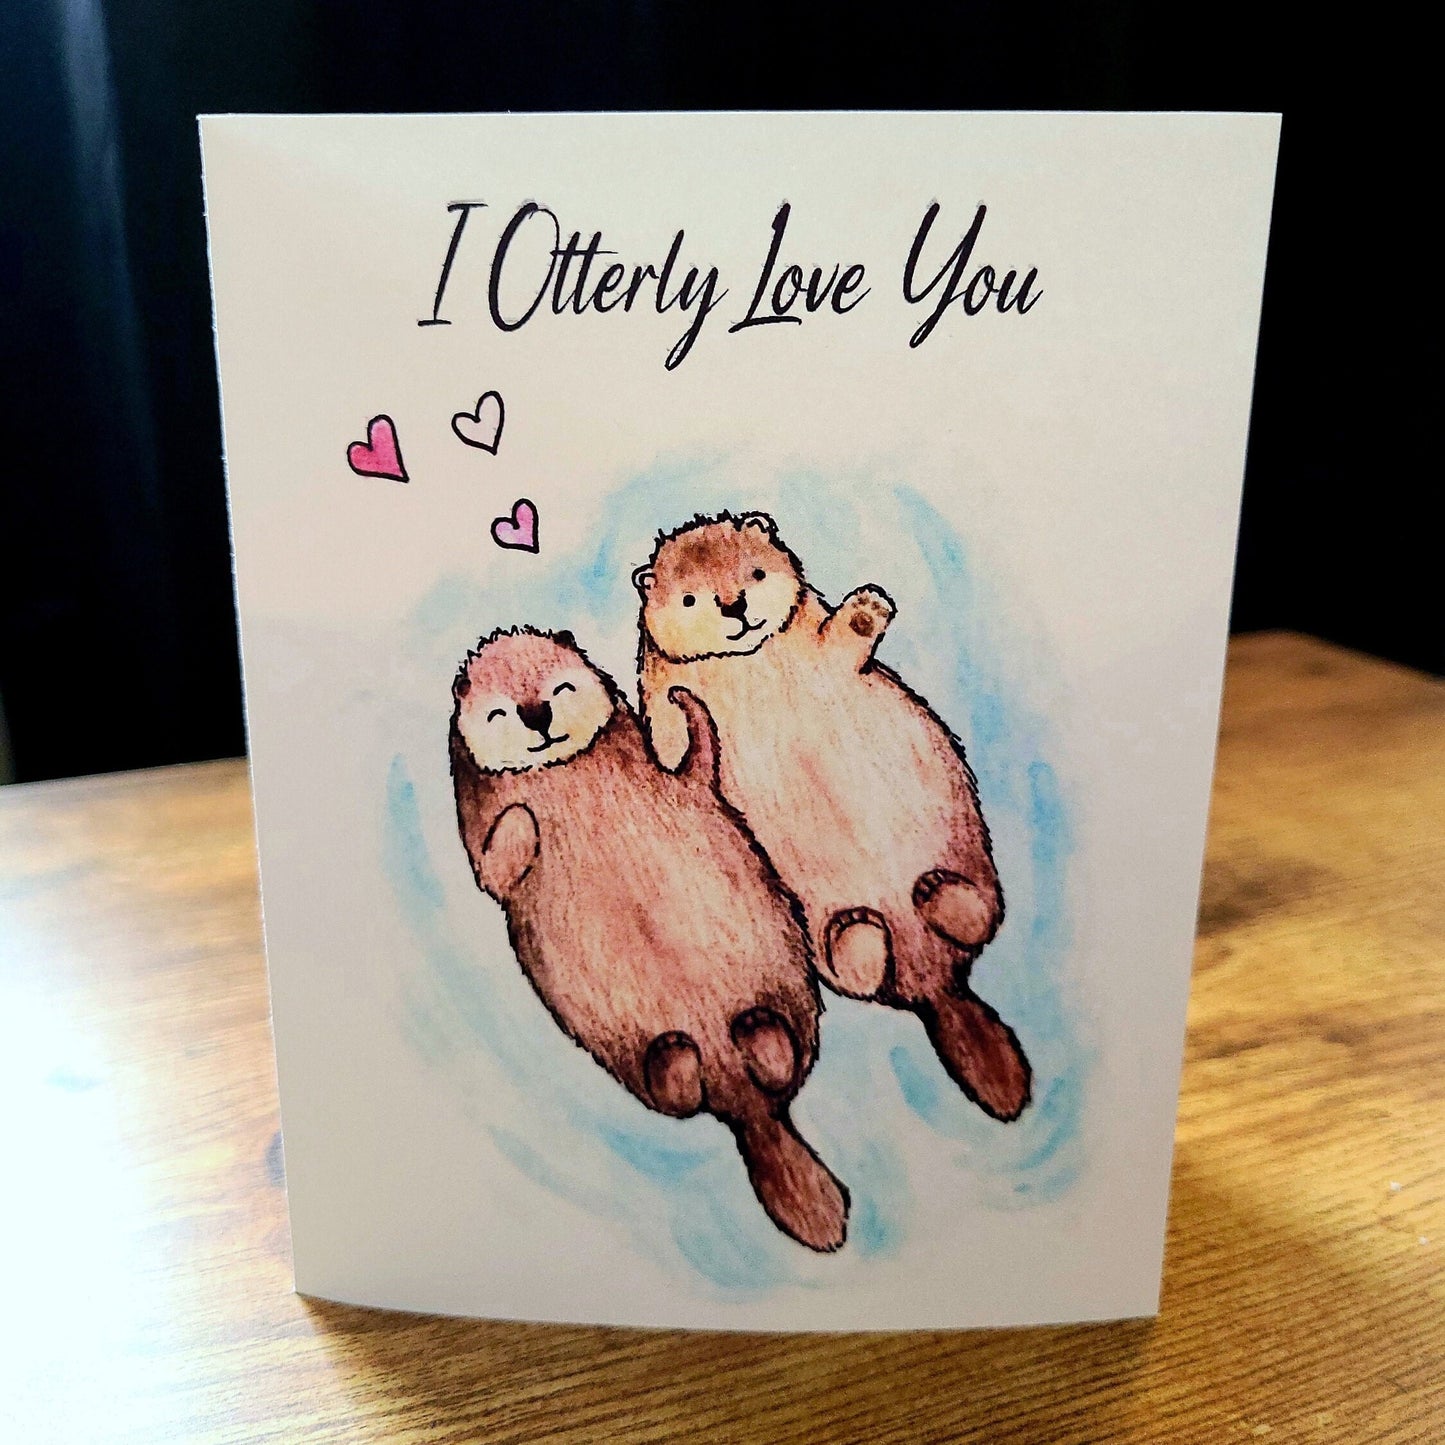 I otterly love you, Cute otter card, Love Card, Anniversary Card, Valentines Day, Anniversary, Love, Pun card, Animal card, Sweet Otters